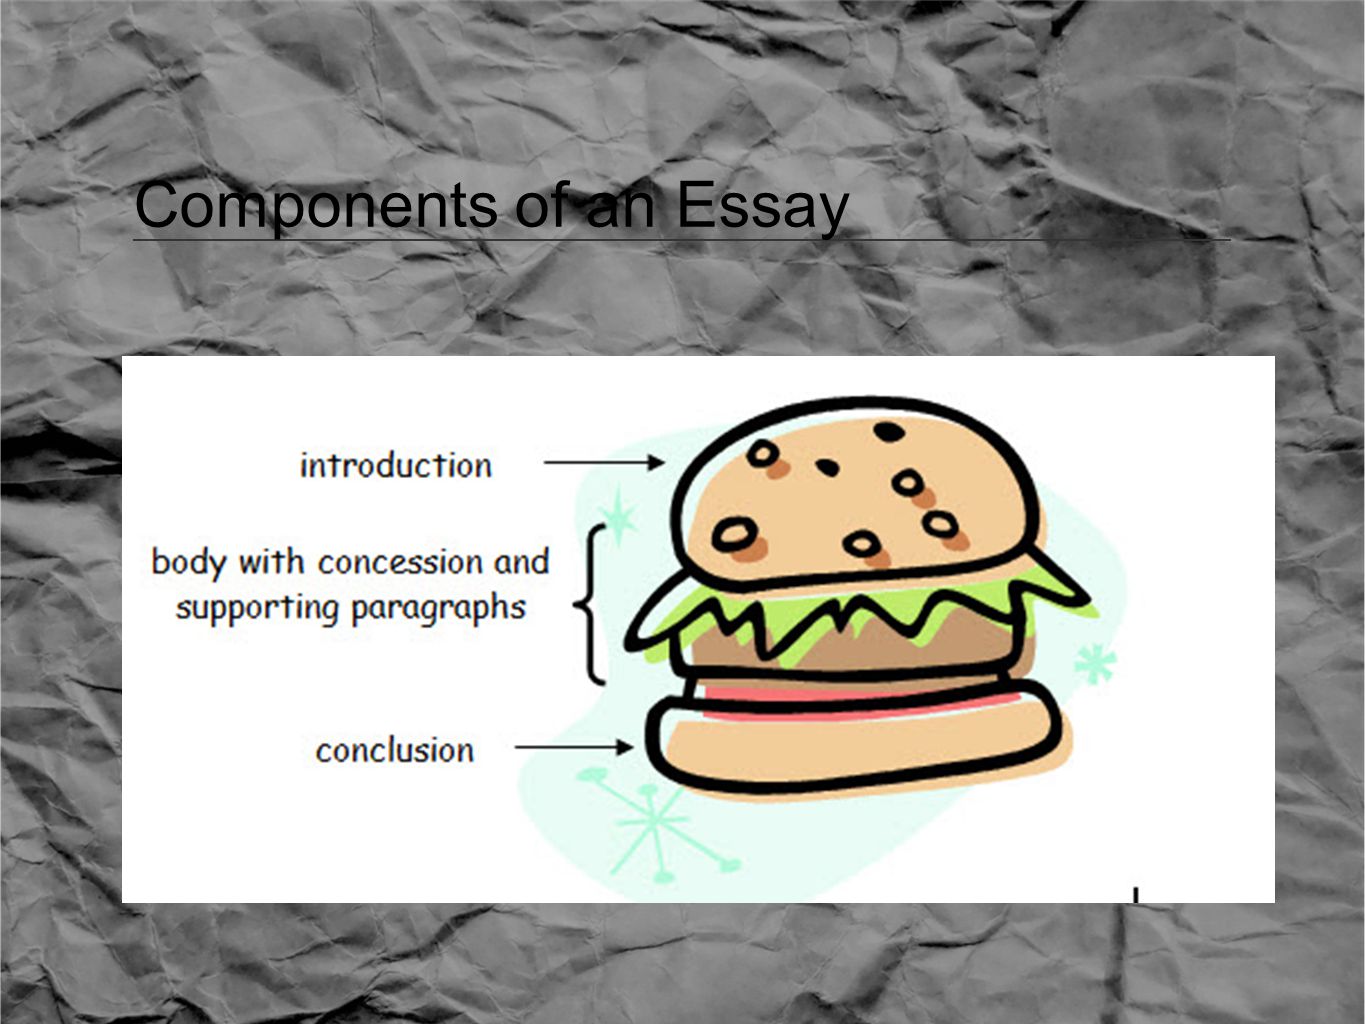 Components of an Essay